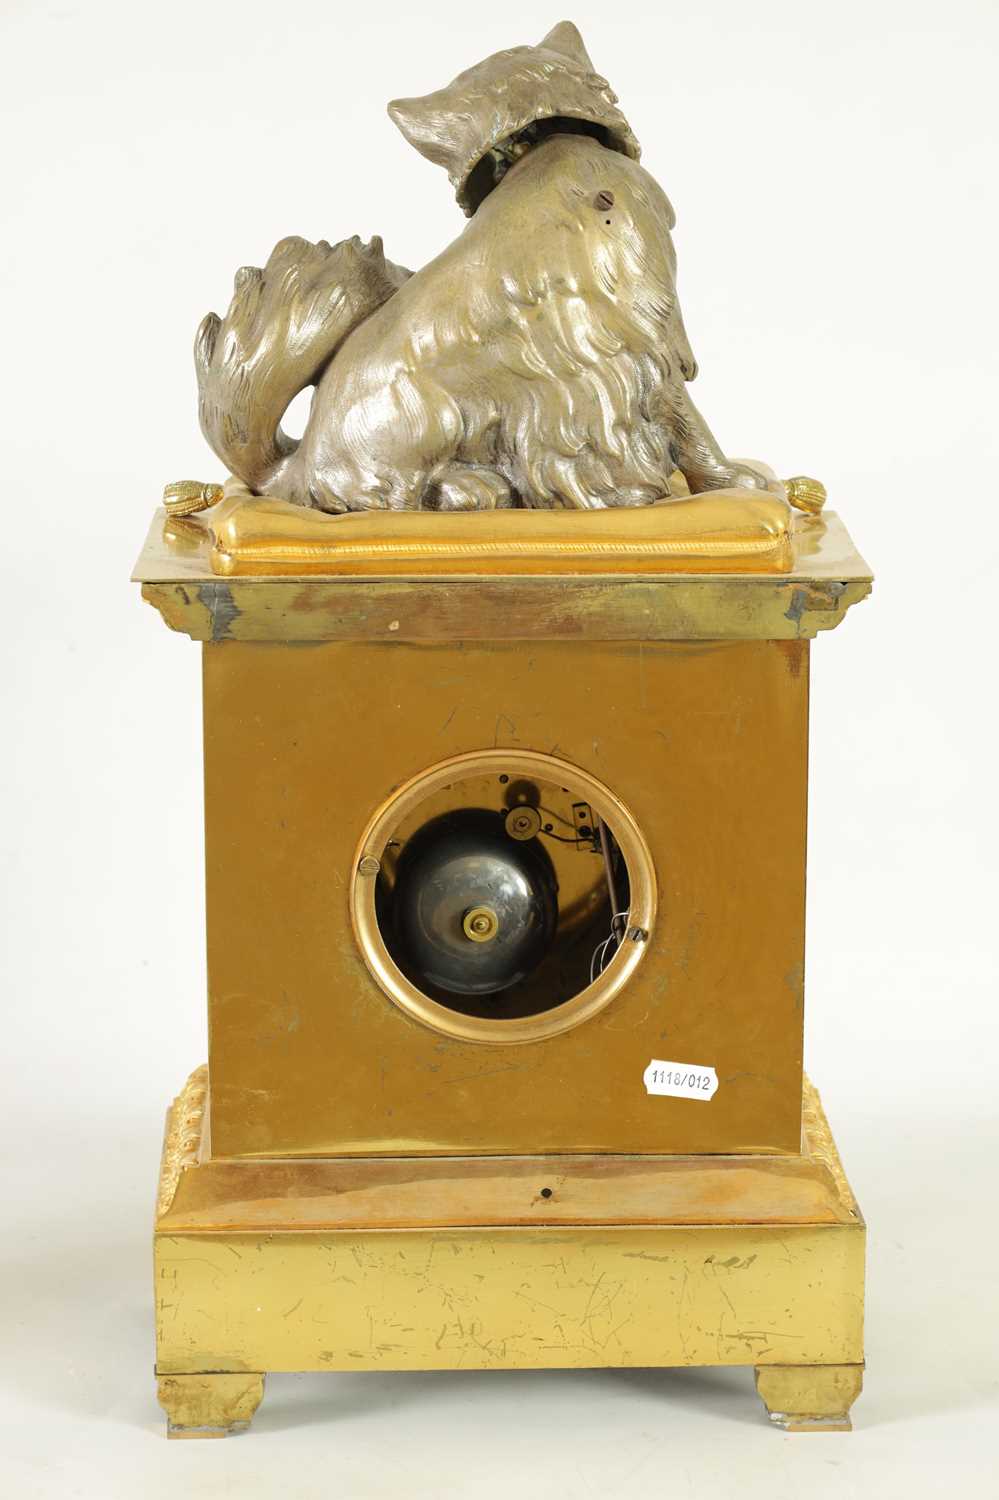 A RARE EARLY 19TH CENTURY FRENCH BRONZE AND ORMOLU AUTOMATION MANTEL CLOCK - Image 6 of 9